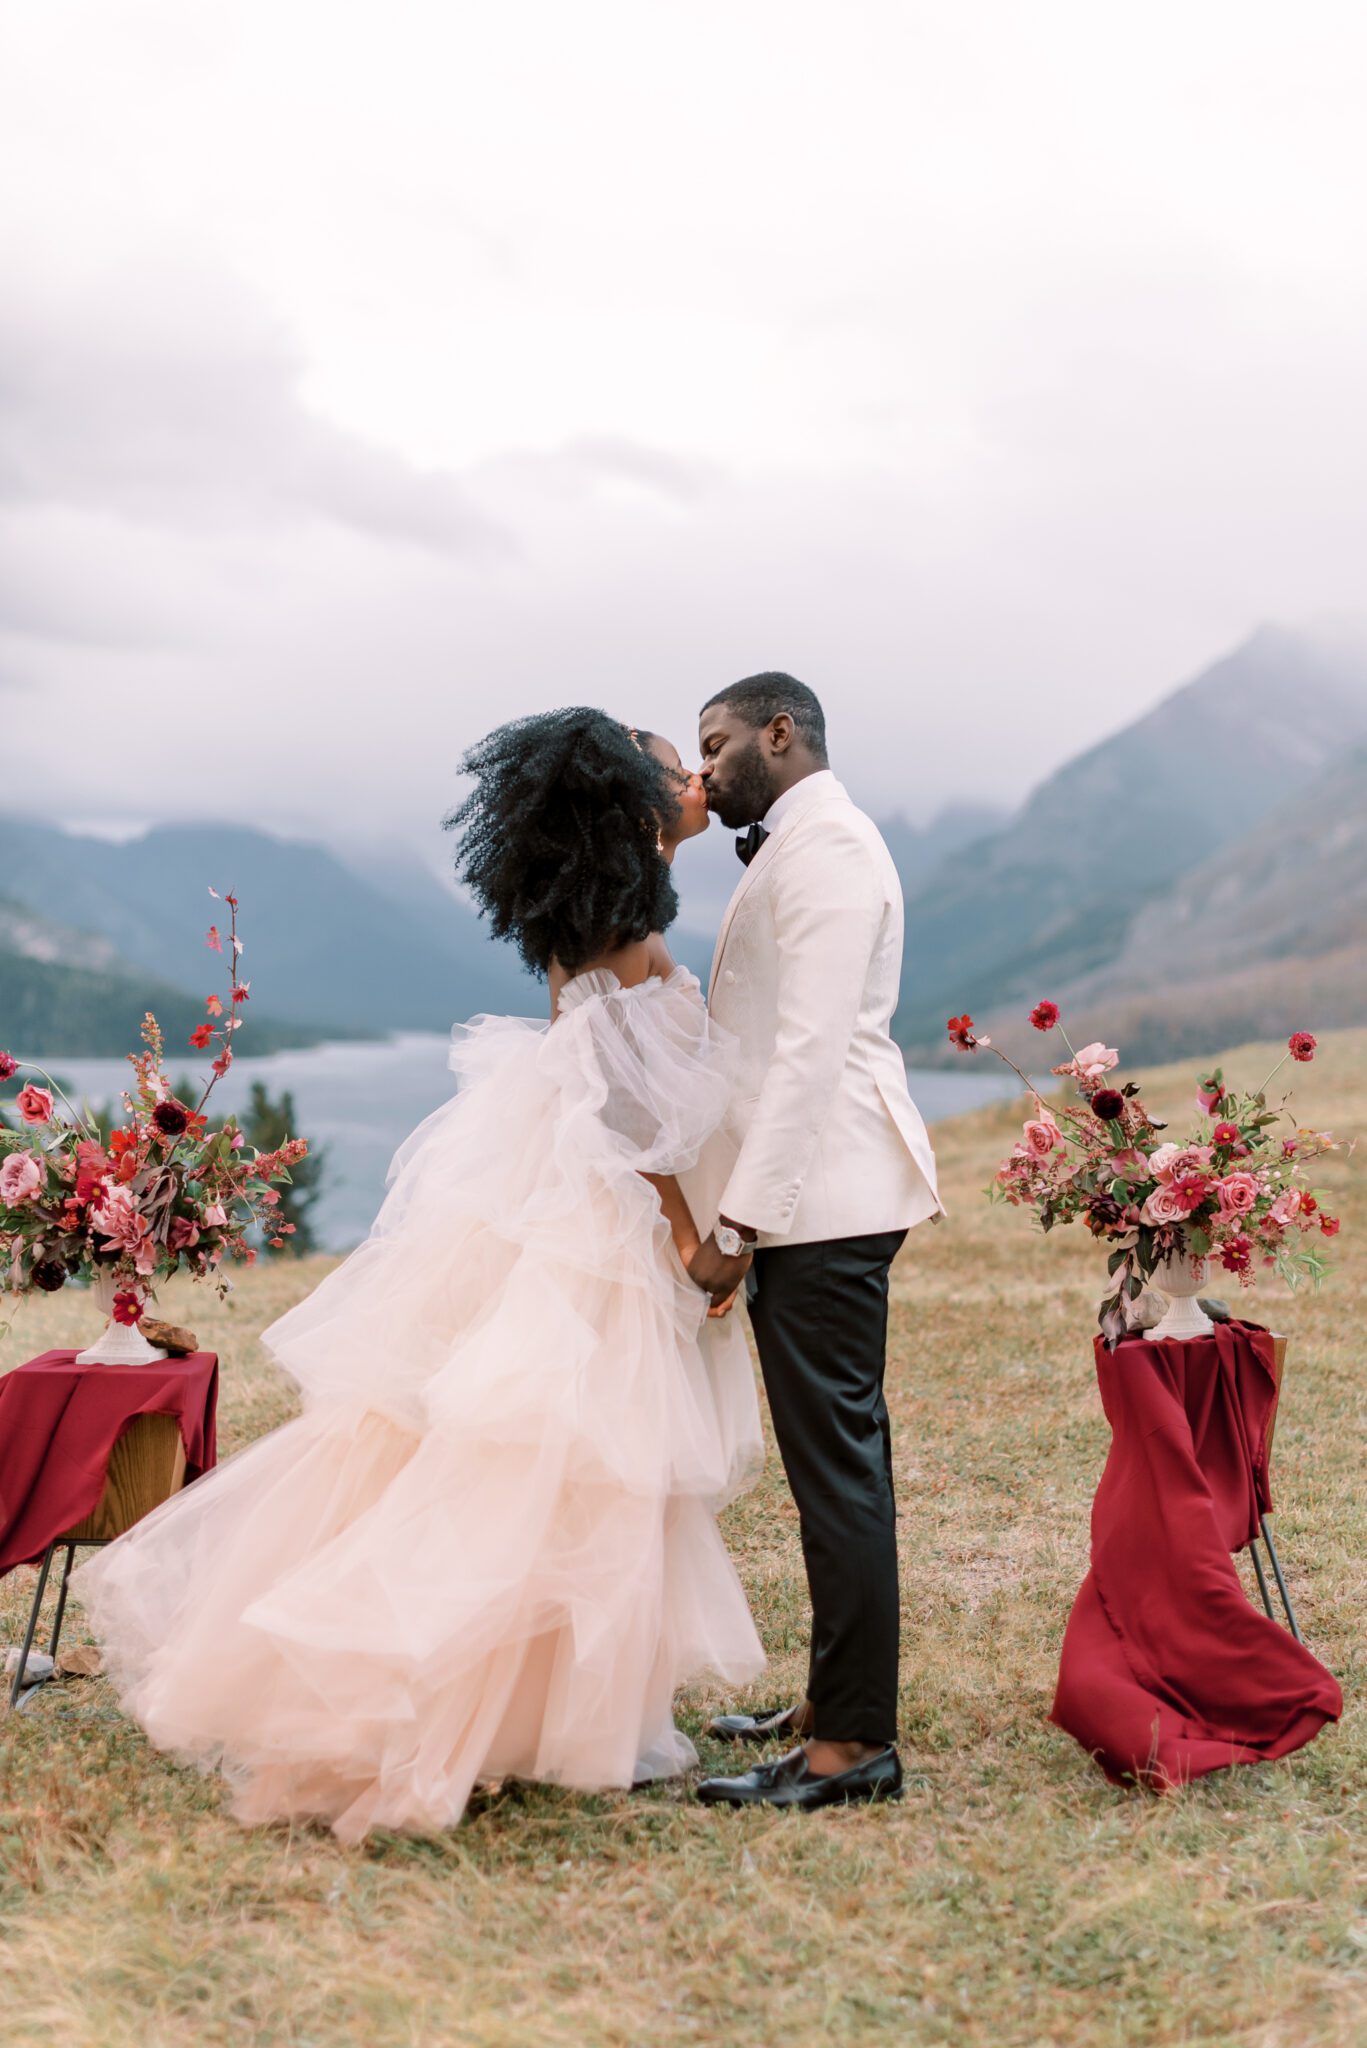 Intimate Elopement in Waterton Alberta, bride wearing blush wedding dress by Alexandra Victoria Rose, mountain lakeside couples portrait inspiration, fall floral inspiration in merlot and berry